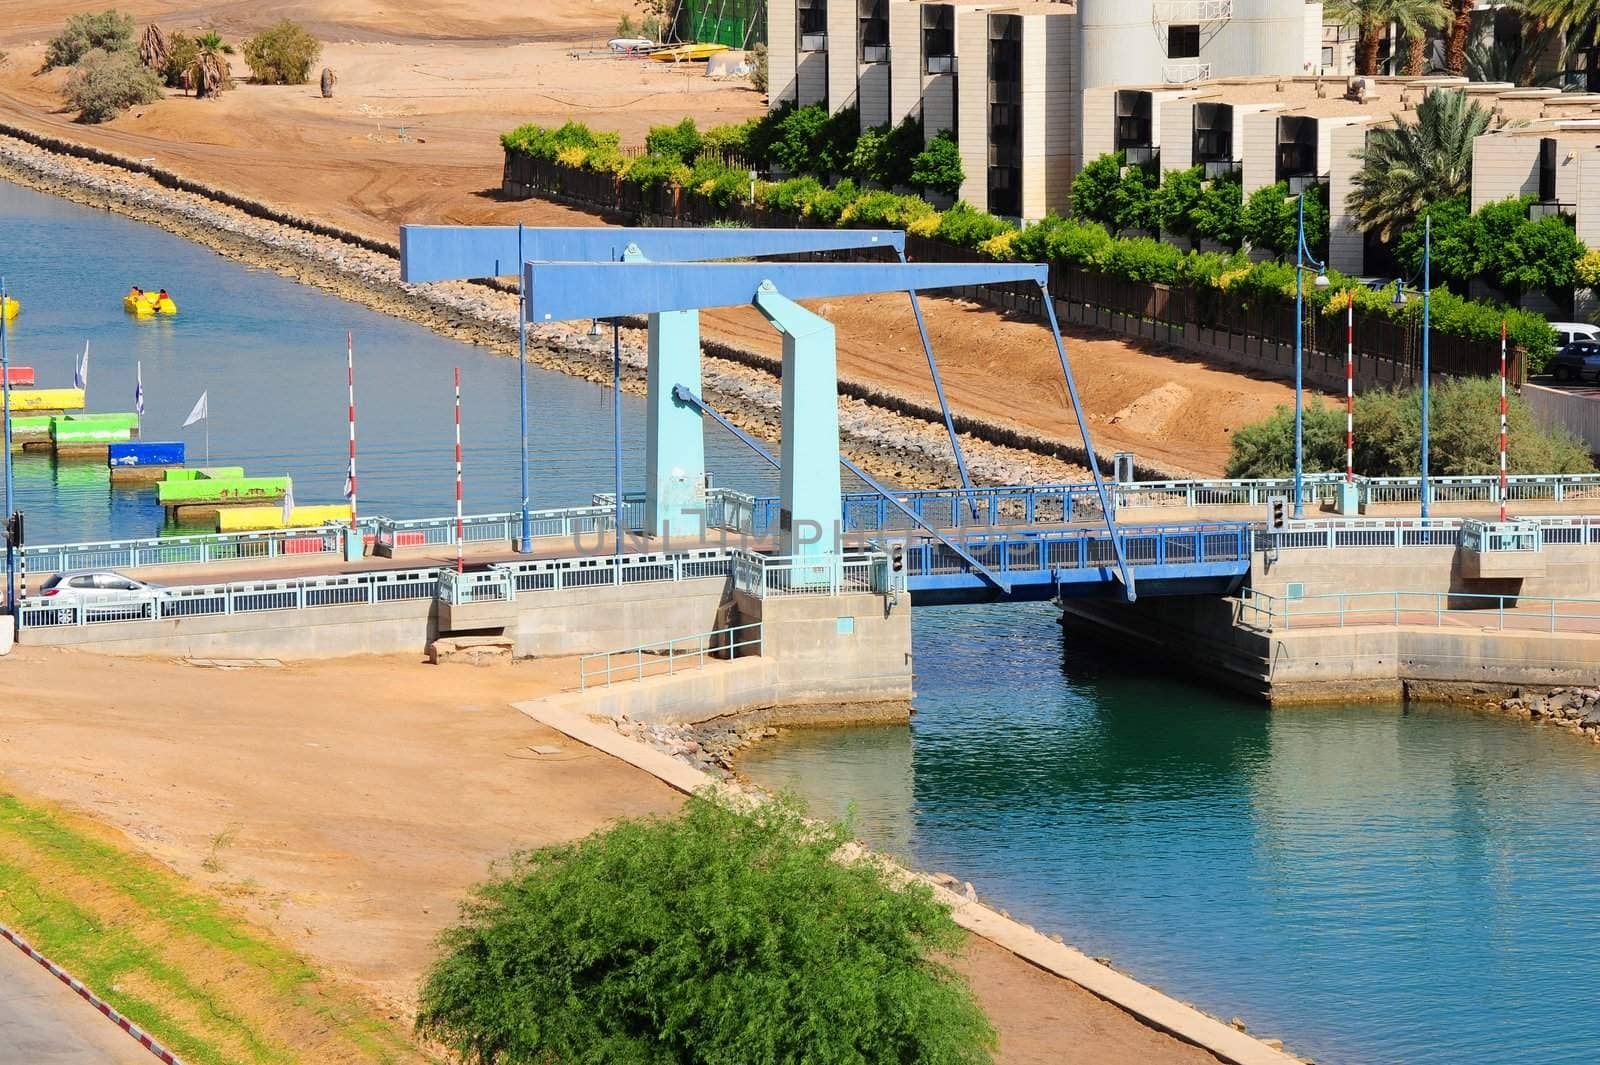 Steel Movable Bridge Above Rowing Canal In Eilat, Israel.